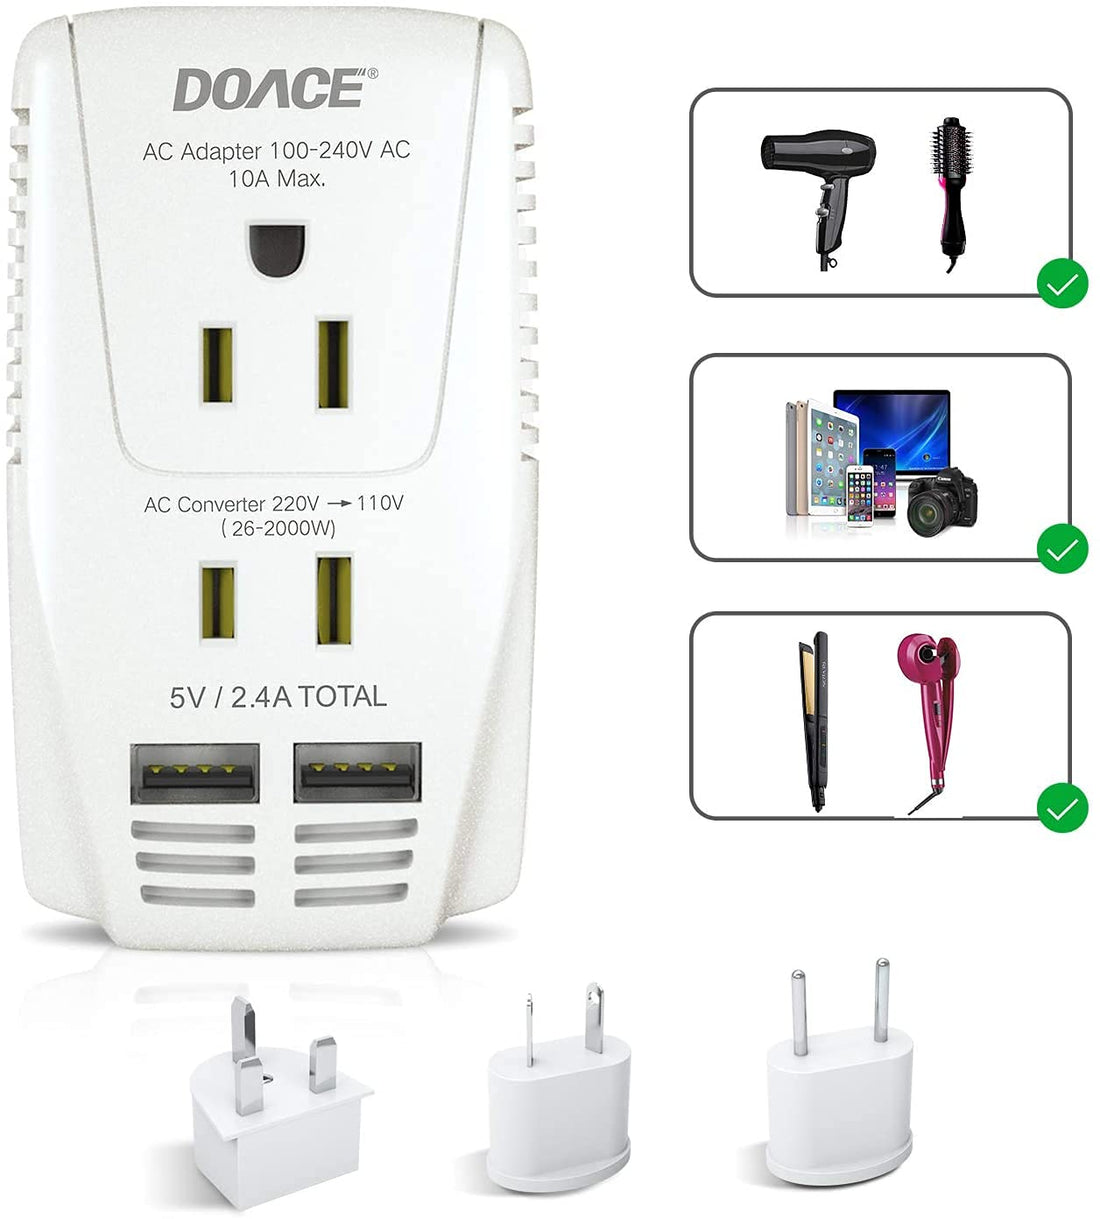 DOACE C11 2000W Travel Voltage Converter for Hair Dryer Straightener Curling Iron, Step Down 220V to 110V, 10A Power Adapter with 2 USB and EU/UK/AU/US Plugs for Laptop Camera Cell Phone (White)